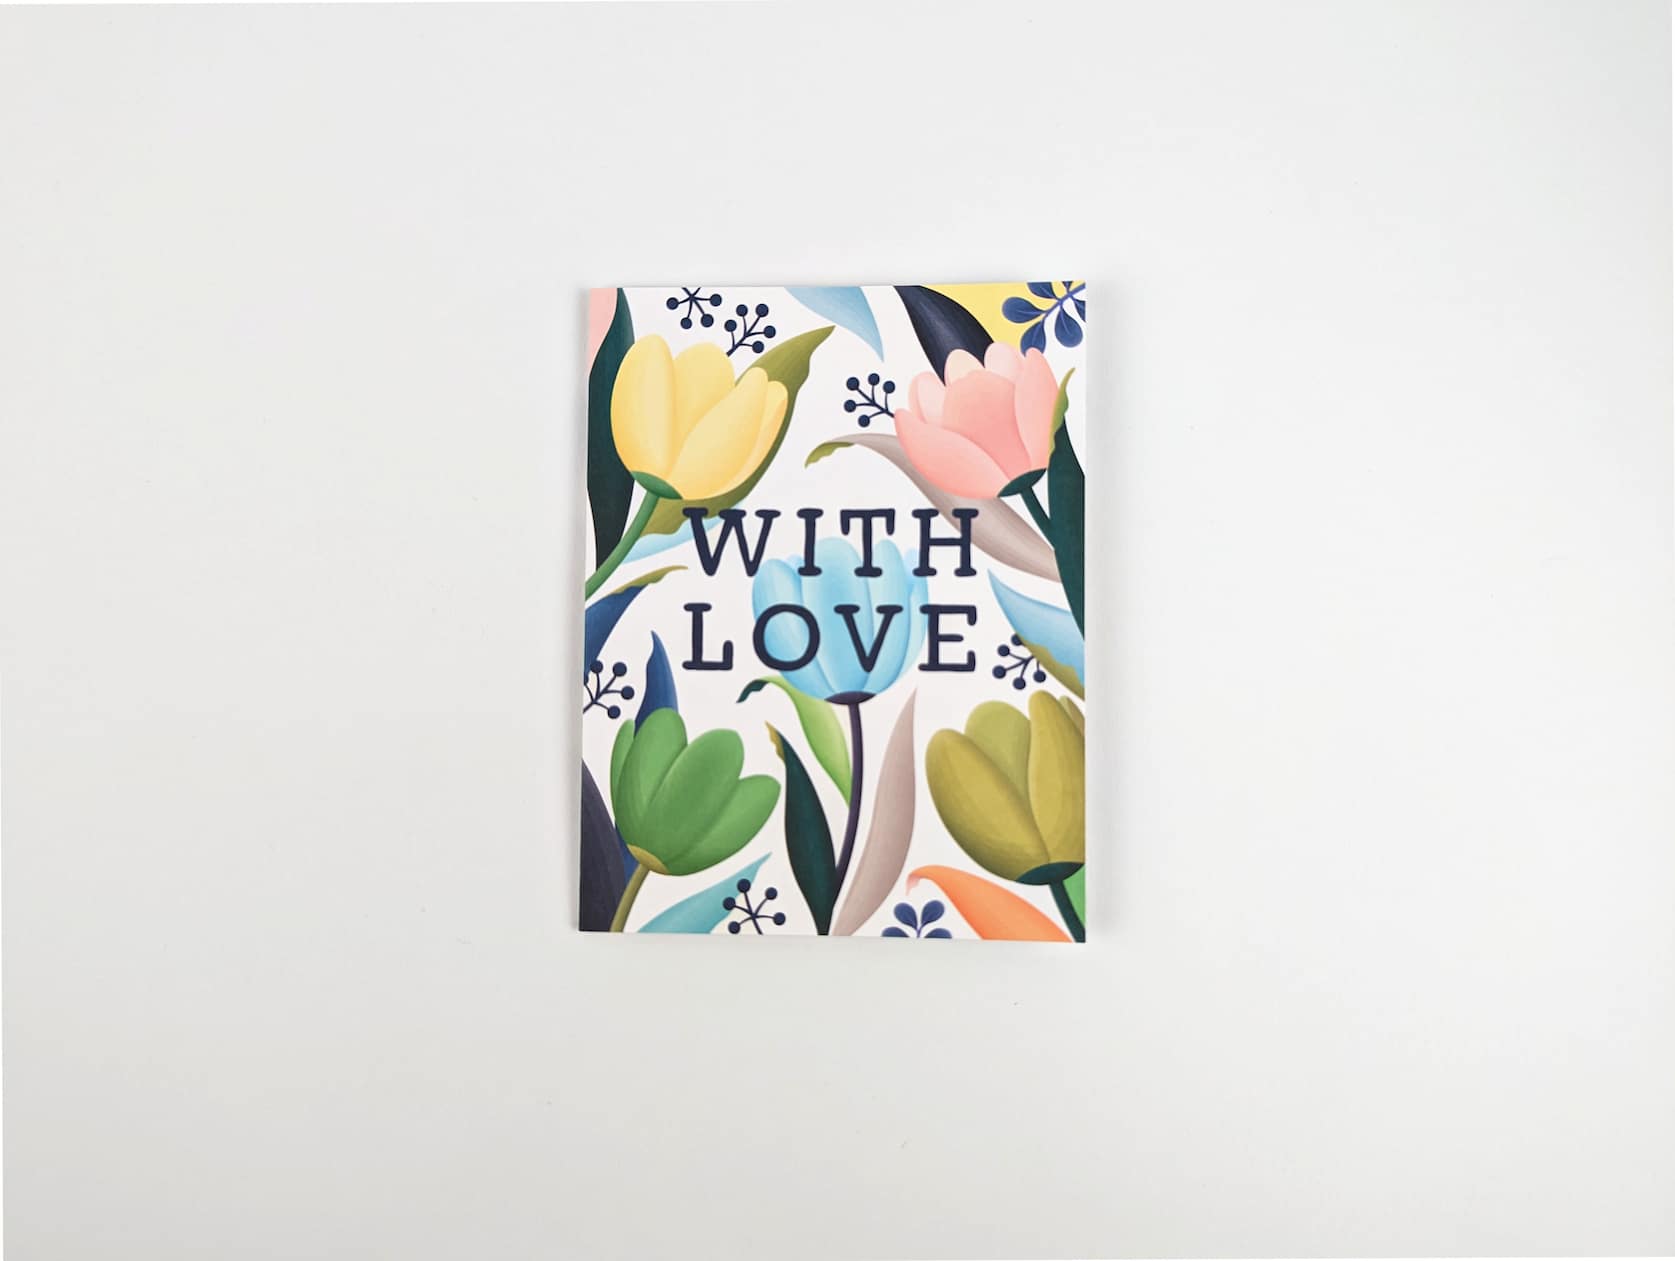 White horizontal card with blue text in the centre that reads: WITH LOVE. A variety of pastel blue, yellow, green and pink tulips, blue, green and orange leaves, and blue sprigs featured behind the text.